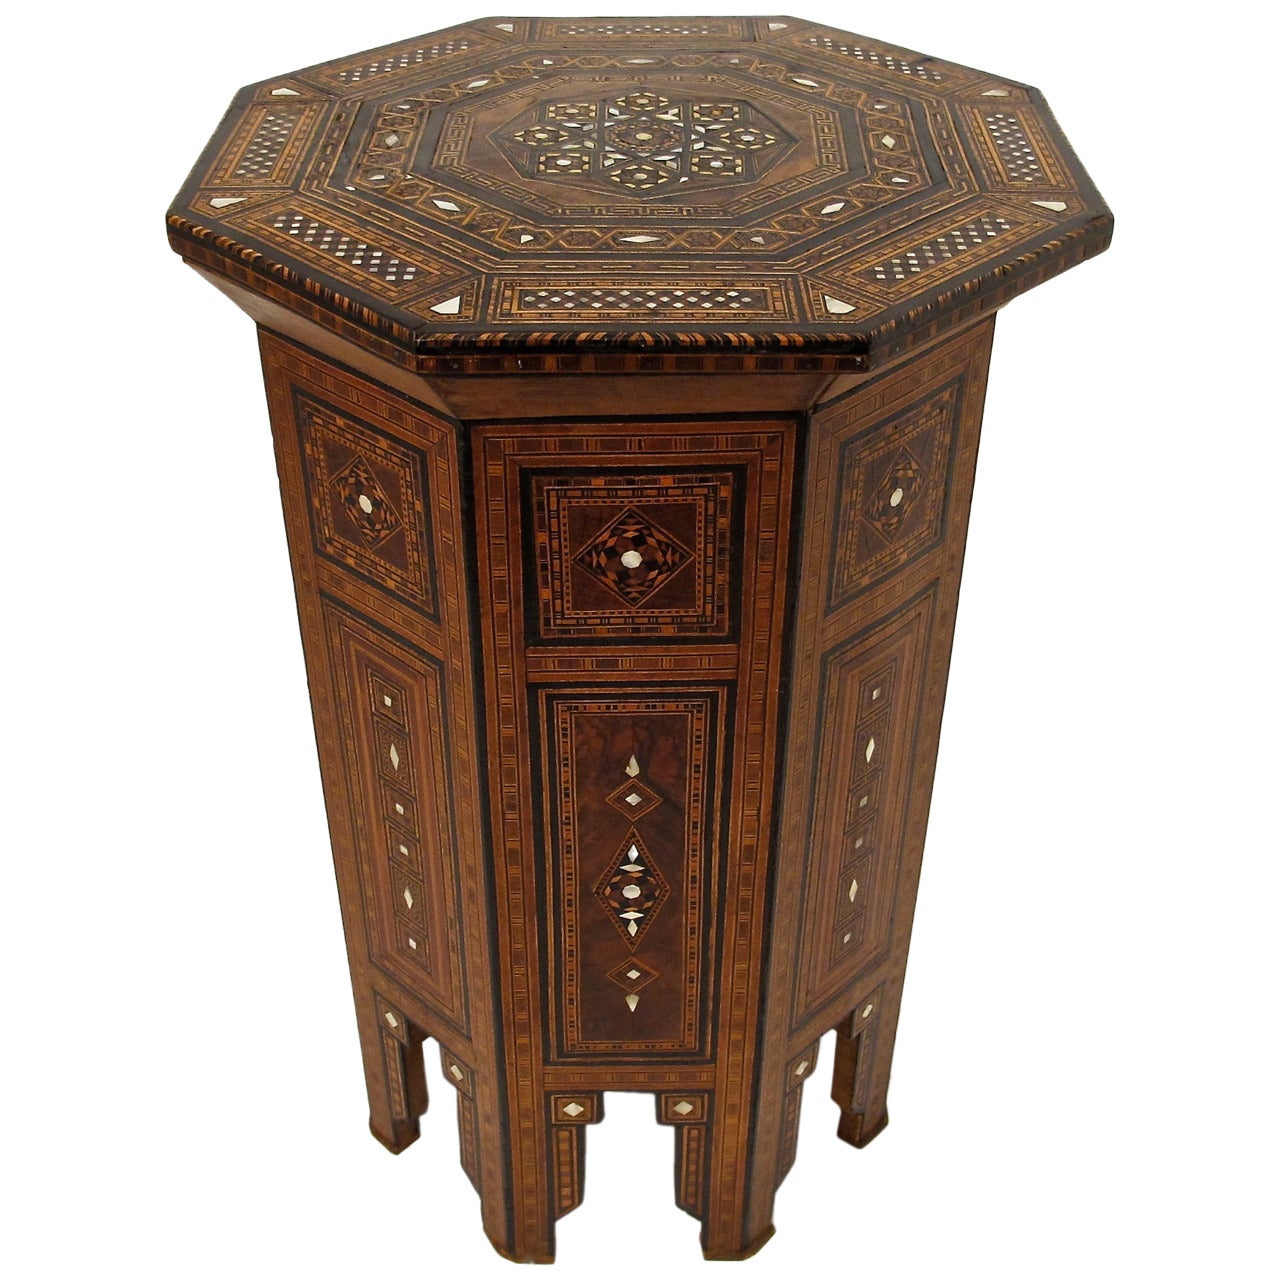 Syrian Inlaid Tabouret Side Table